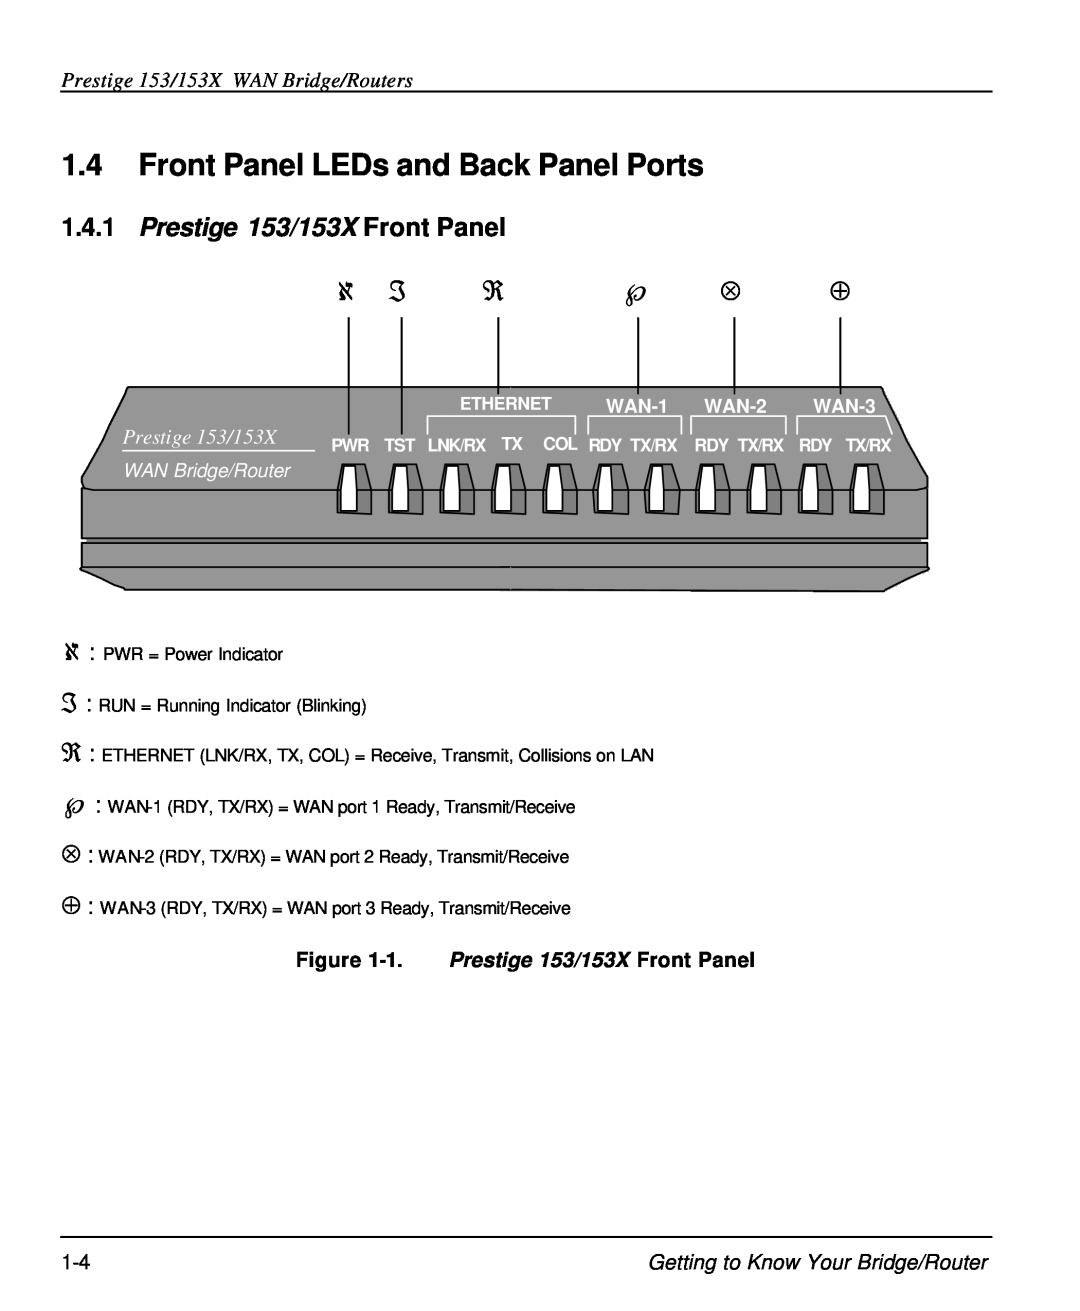 ZyXEL Communications Front Panel LEDs and Back Panel Ports, ℵ ℑ ℜ, Prestige 153/153X Front Panel, WAN Bridge/Router 